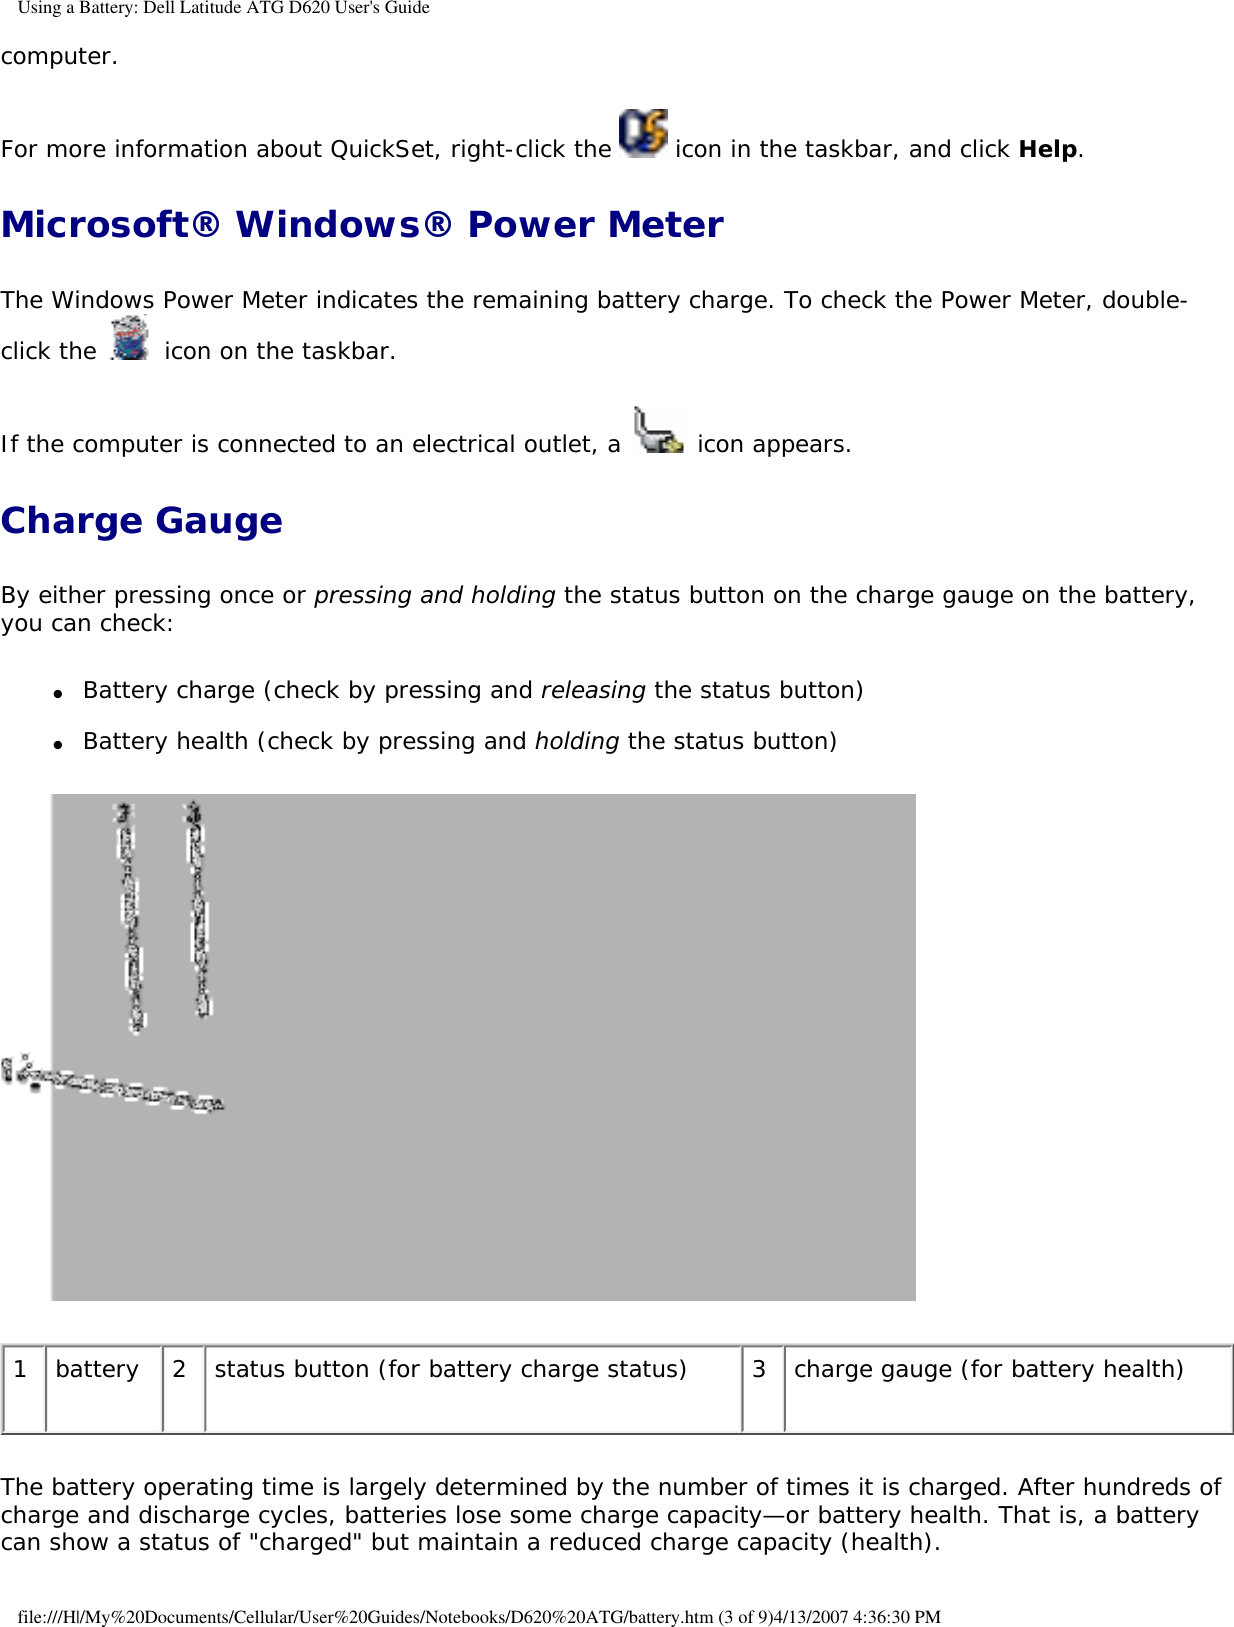 Using a Battery: Dell Latitude ATG D620 User&apos;s Guidecomputer. For more information about QuickSet, right-click the   icon in the taskbar, and click Help.Microsoft® Windows® Power MeterThe Windows Power Meter indicates the remaining battery charge. To check the Power Meter, double-click the   icon on the taskbar. If the computer is connected to an electrical outlet, a   icon appears.Charge GaugeBy either pressing once or pressing and holding the status button on the charge gauge on the battery, you can check:●     Battery charge (check by pressing and releasing the status button)  ●     Battery health (check by pressing and holding the status button)   1 battery 2 status button (for battery charge status) 3 charge gauge (for battery health)The battery operating time is largely determined by the number of times it is charged. After hundreds of charge and discharge cycles, batteries lose some charge capacity—or battery health. That is, a battery can show a status of &quot;charged&quot; but maintain a reduced charge capacity (health). file:///H|/My%20Documents/Cellular/User%20Guides/Notebooks/D620%20ATG/battery.htm (3 of 9)4/13/2007 4:36:30 PM